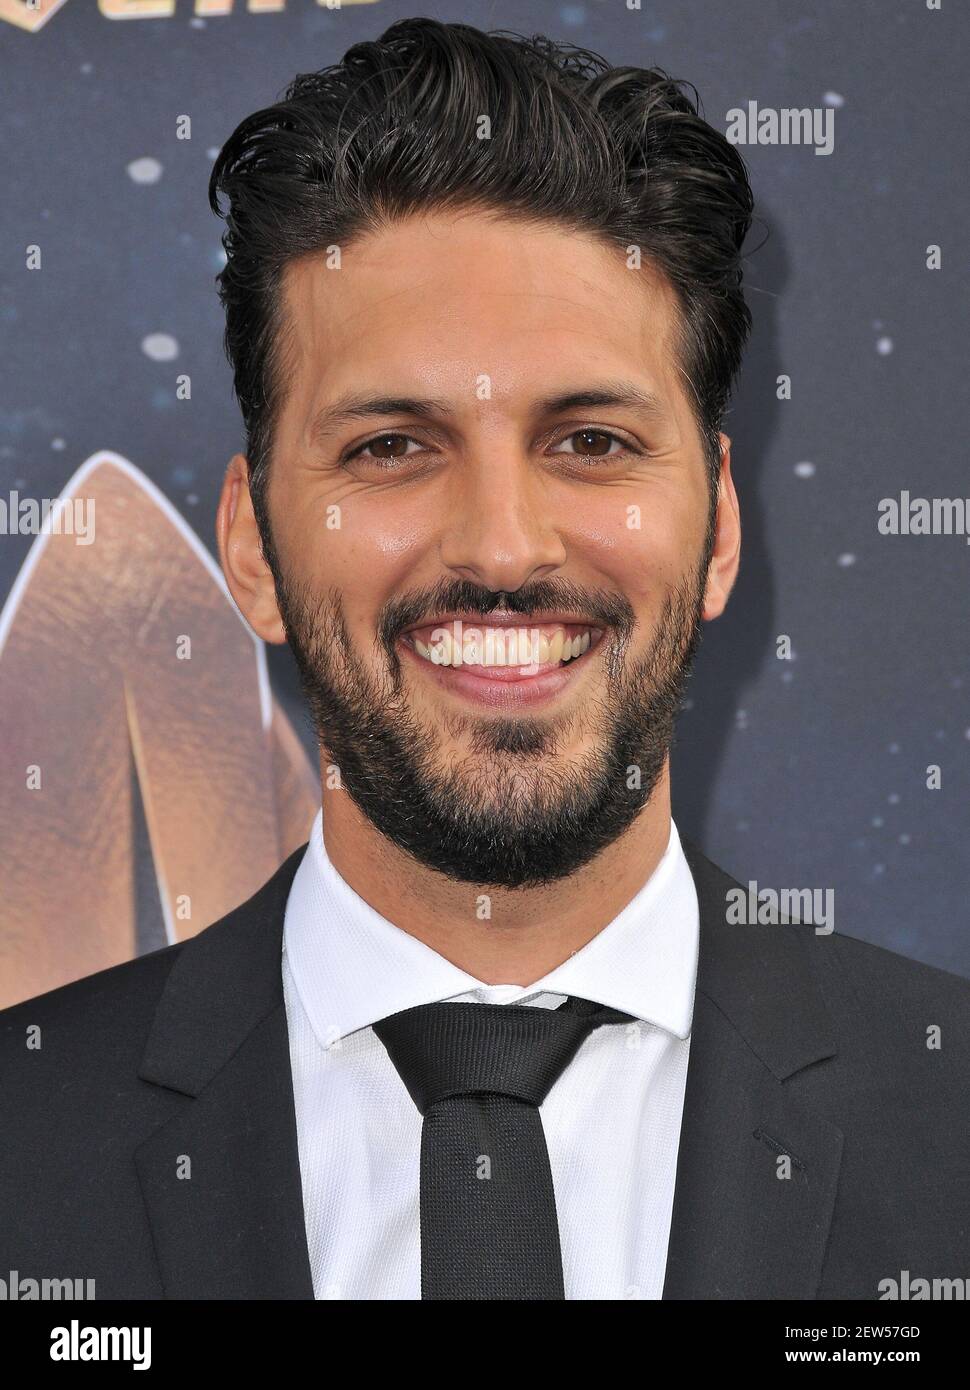 Shazad Latif arrives at the "Star Trek: Discovery" Premiere held at the ArcLight Cinerama Dome in Hollywood, CA on Tuesday, September 19, 2017. (Photo By Sthanlee B. Mirador/Sipa USA) Stock Photo